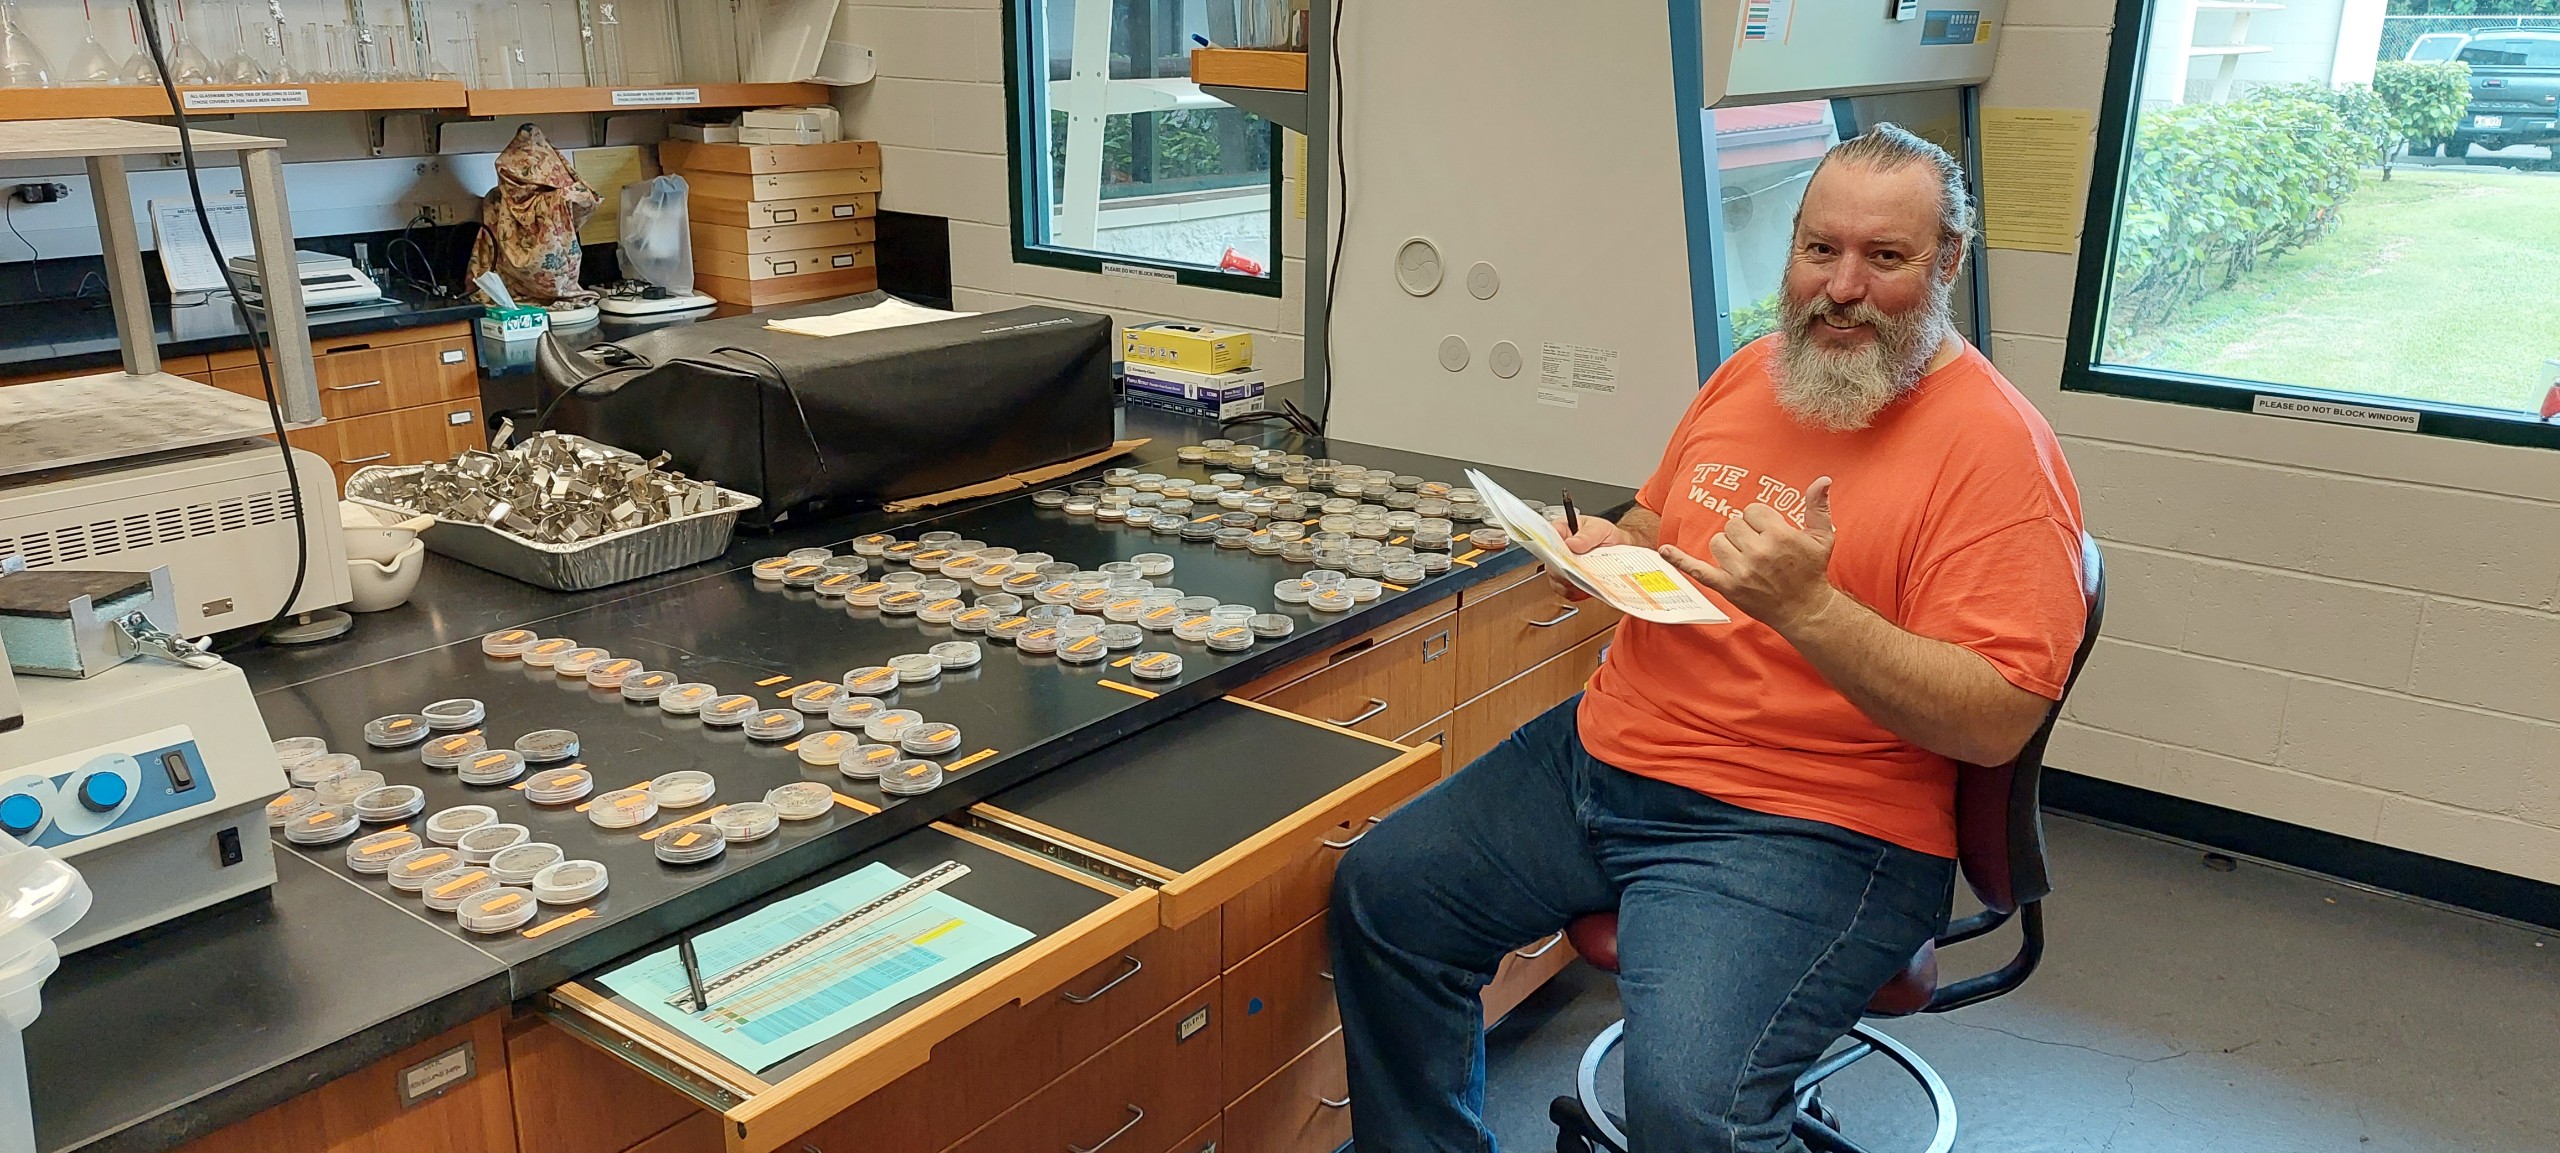 Sean throws a shaka in the lab with dozens of petri dishes sitting on the lab bench